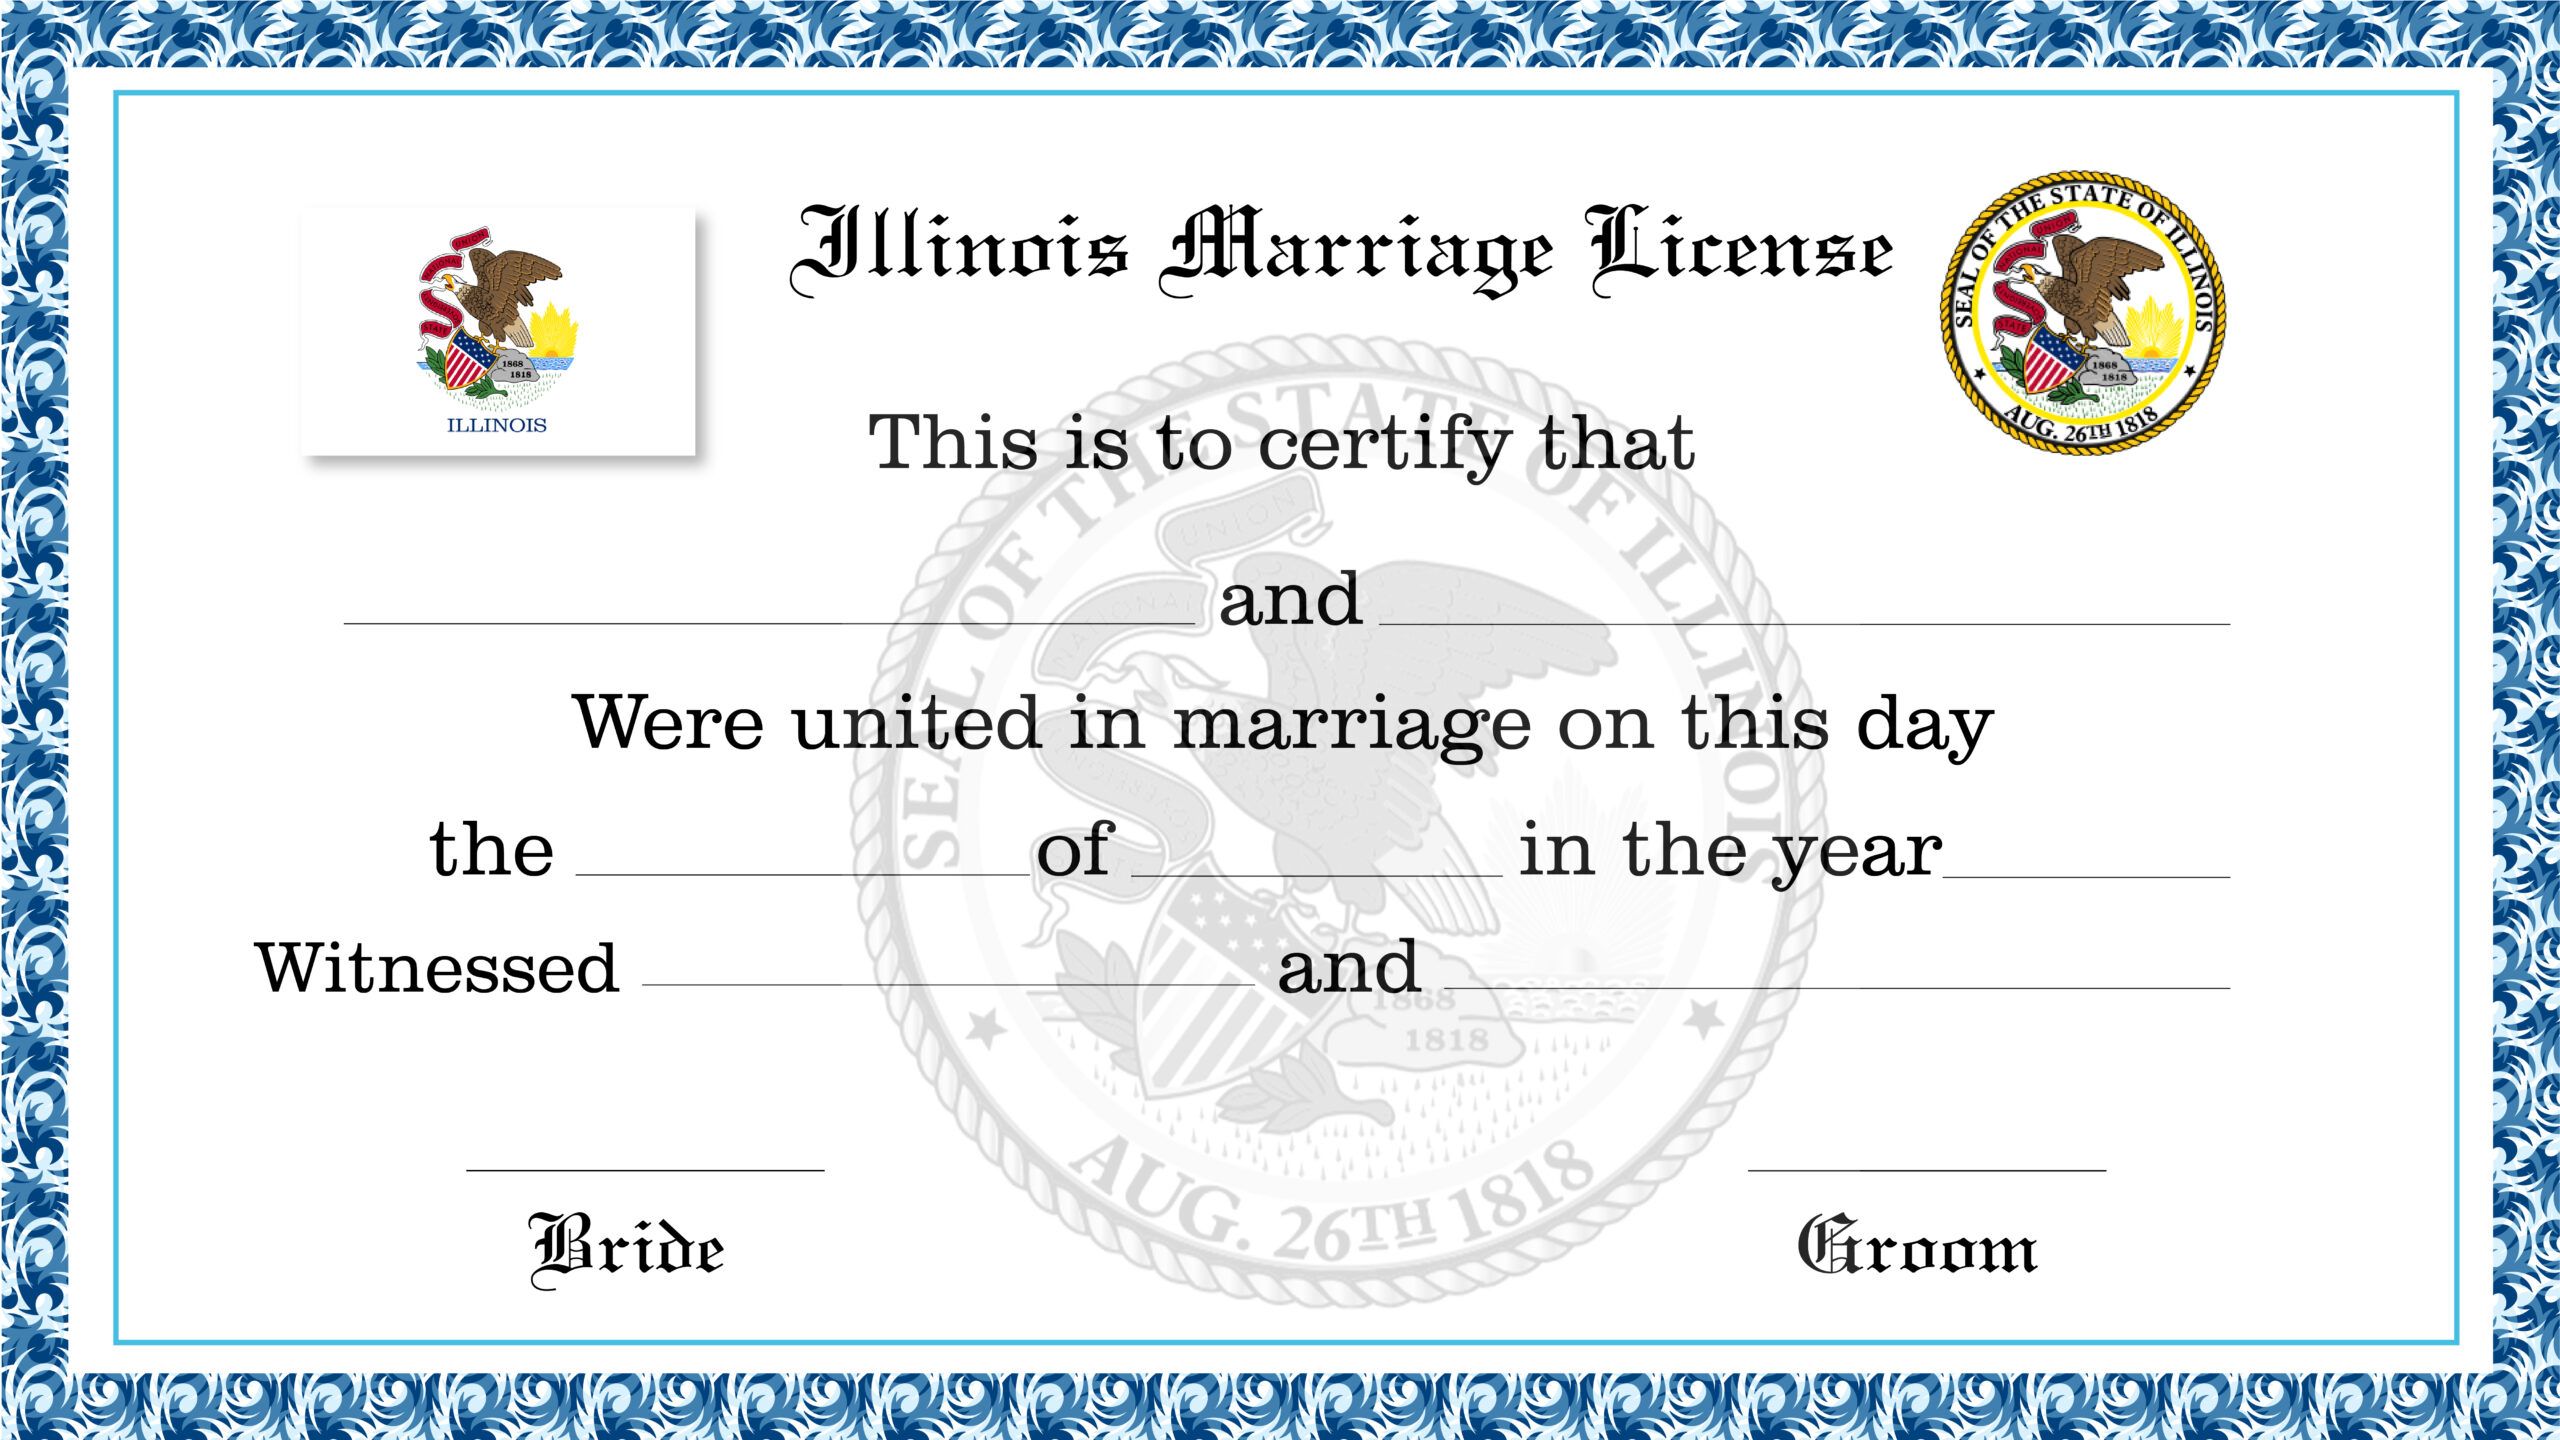 Illinois Marriage License License Lookup